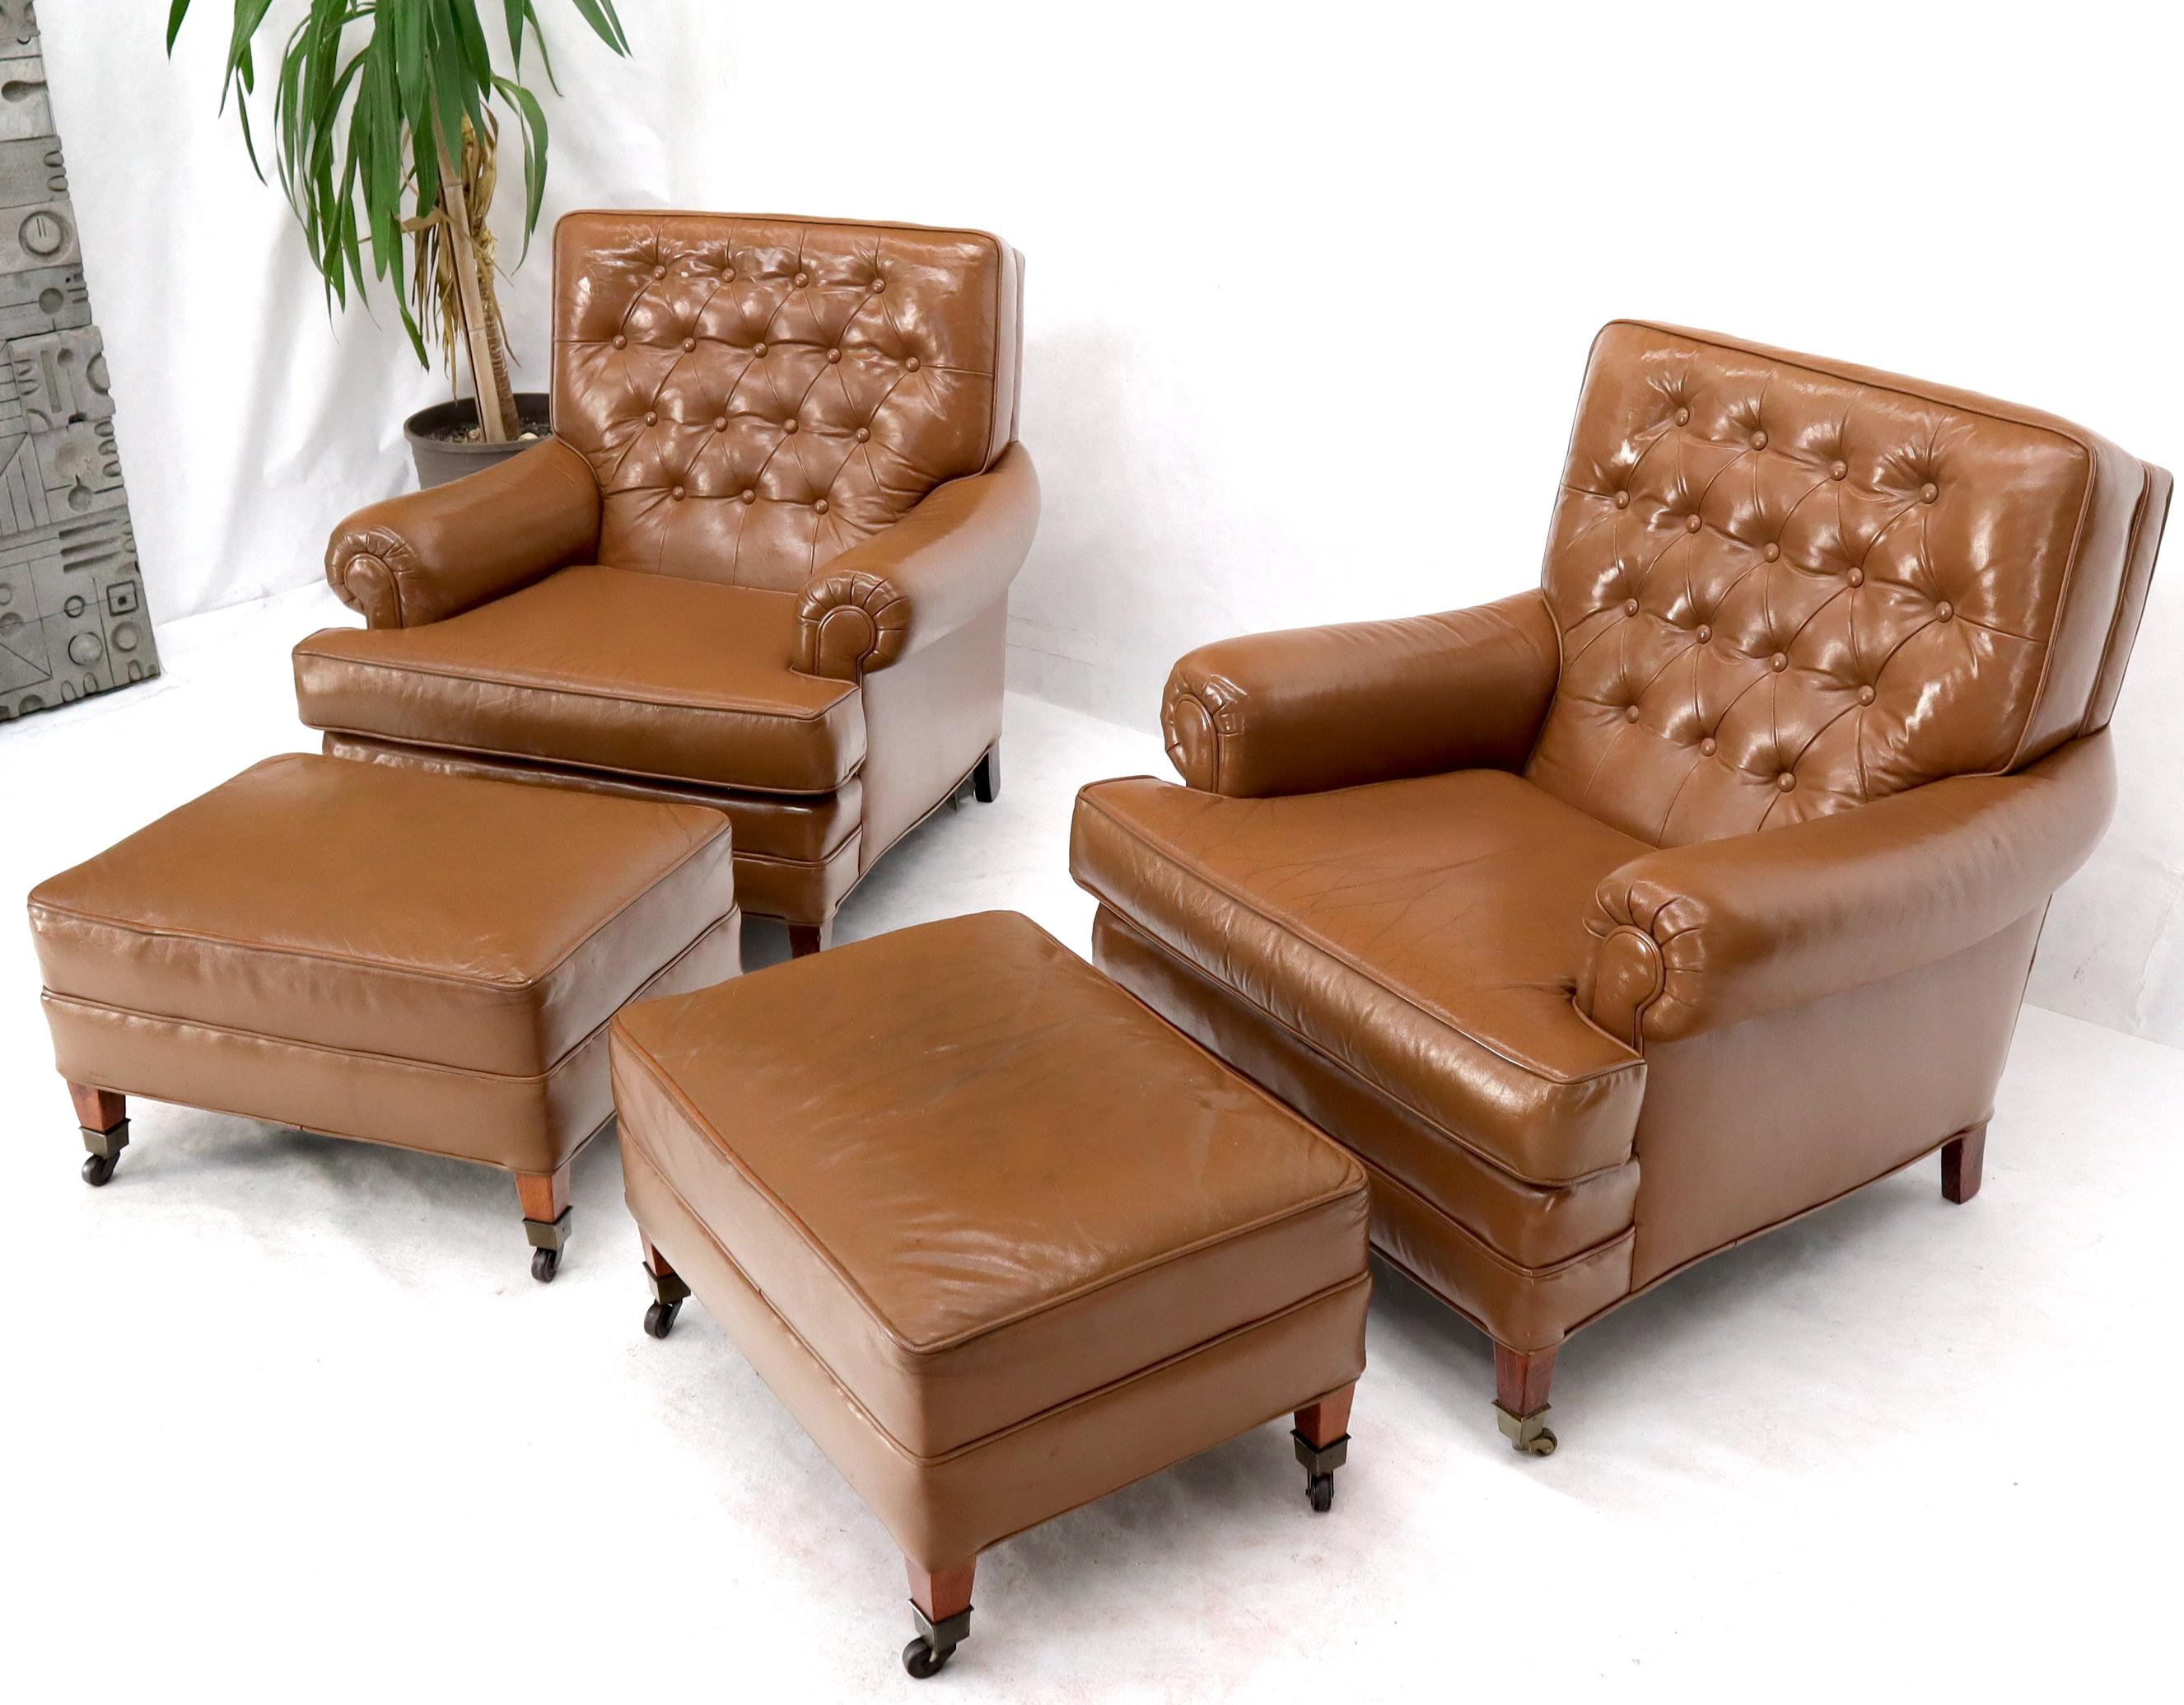 Pair of circa 1960's Chesterfield style brown to tan leather chairs with a pair of matching ottomans foot rests stools. Ottoman dimensions: 18 x 24 x 14.